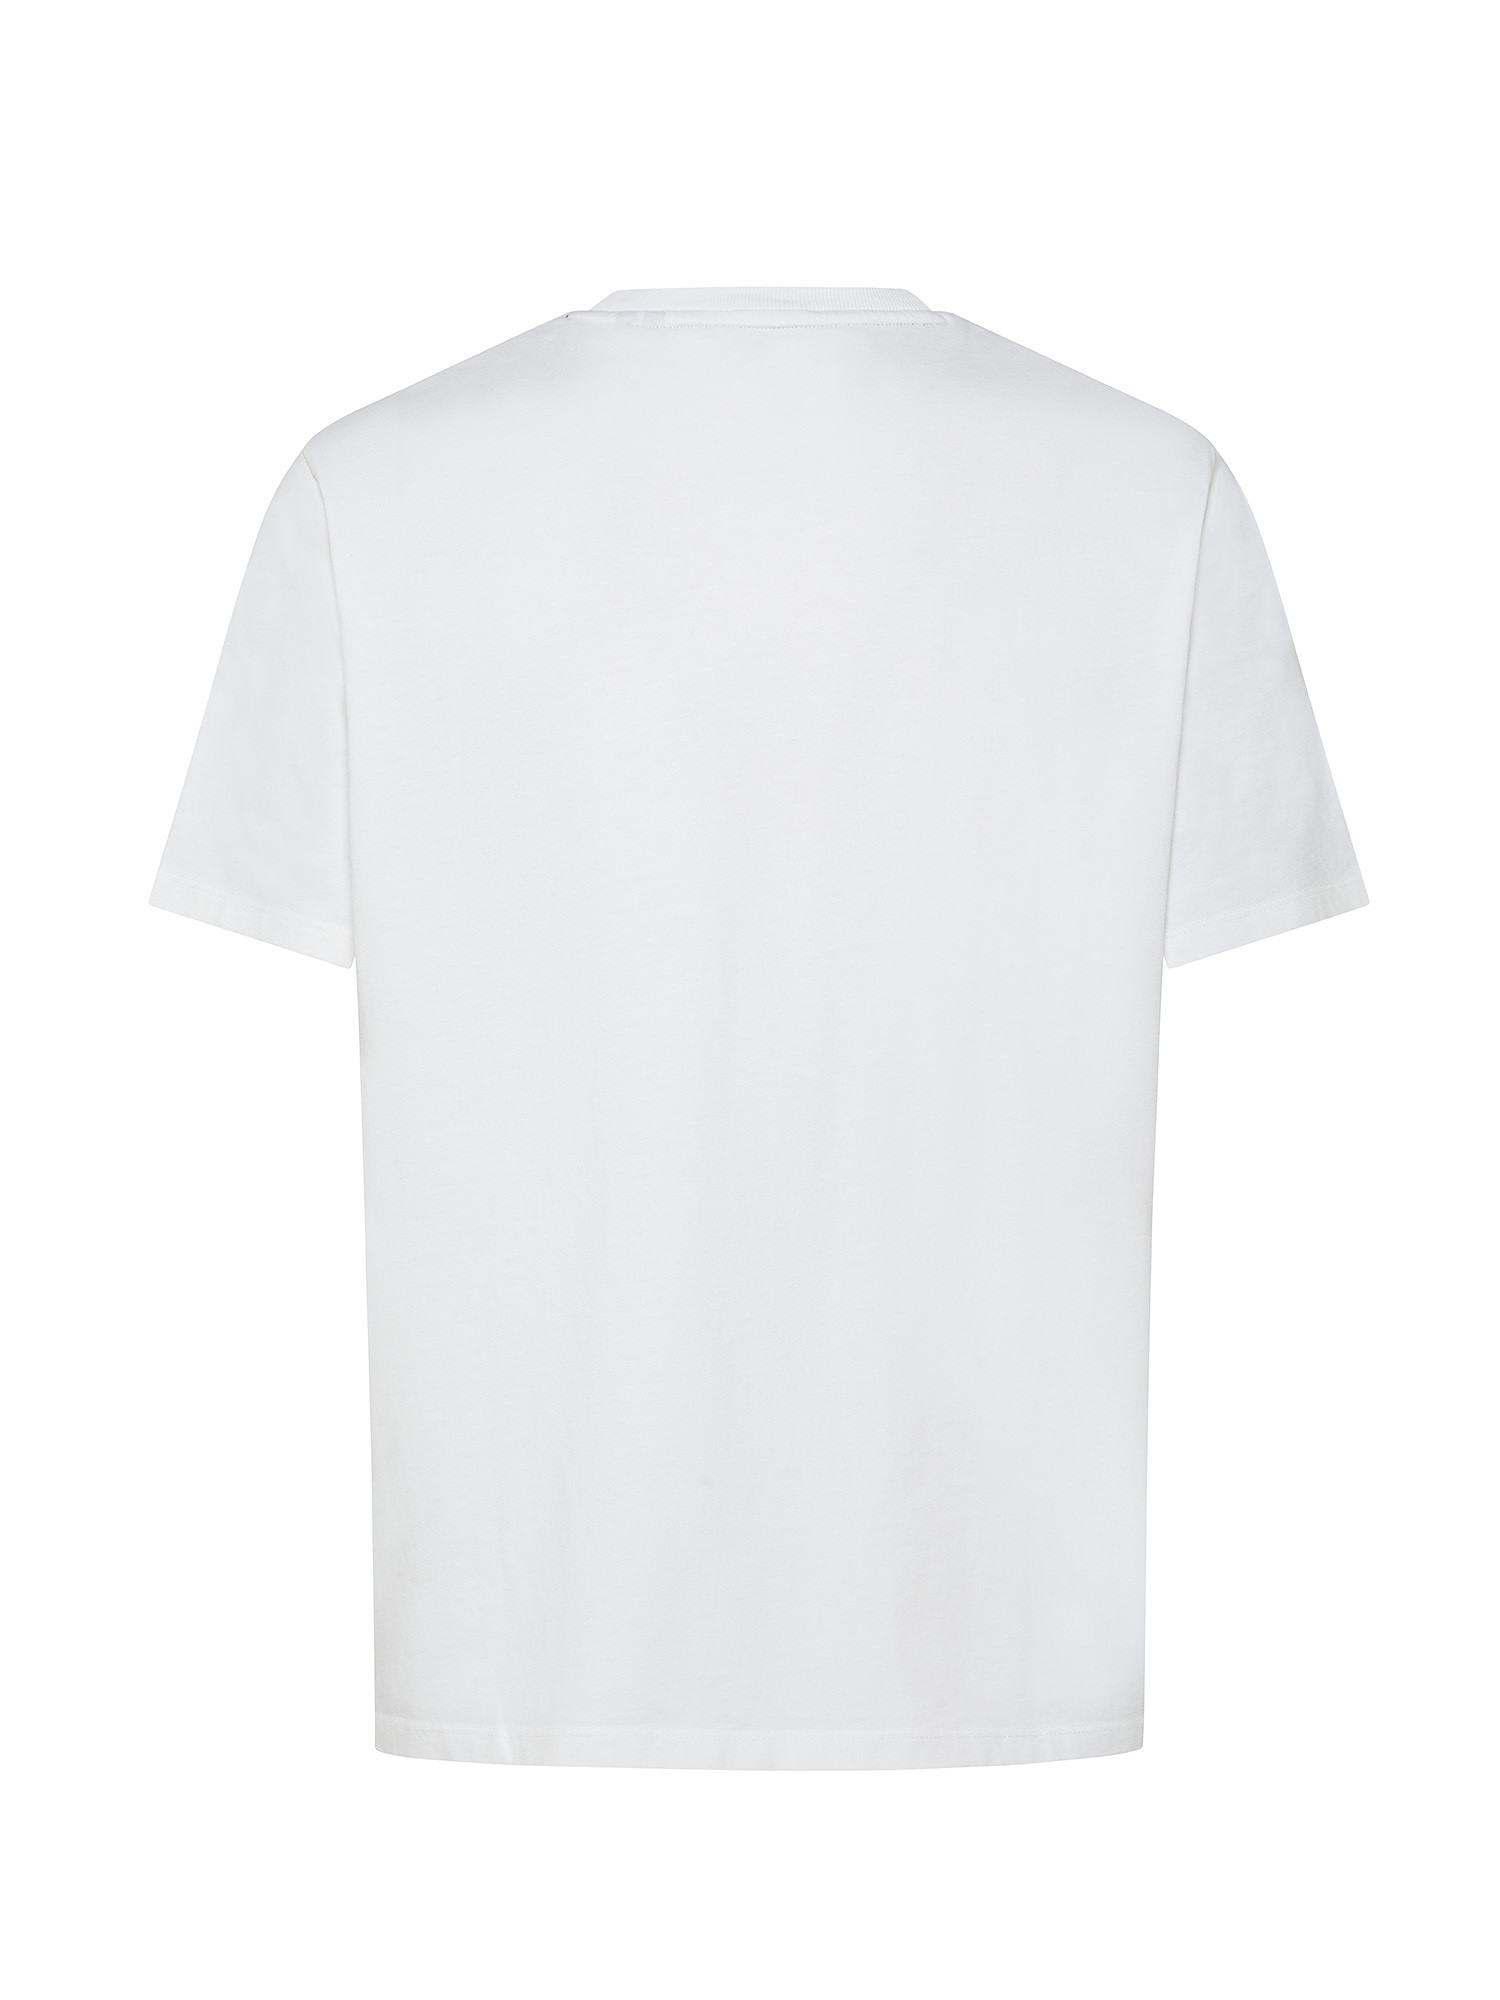 Superdry - T-shirt basica in cotone con mico logo, Bianco, large image number 1